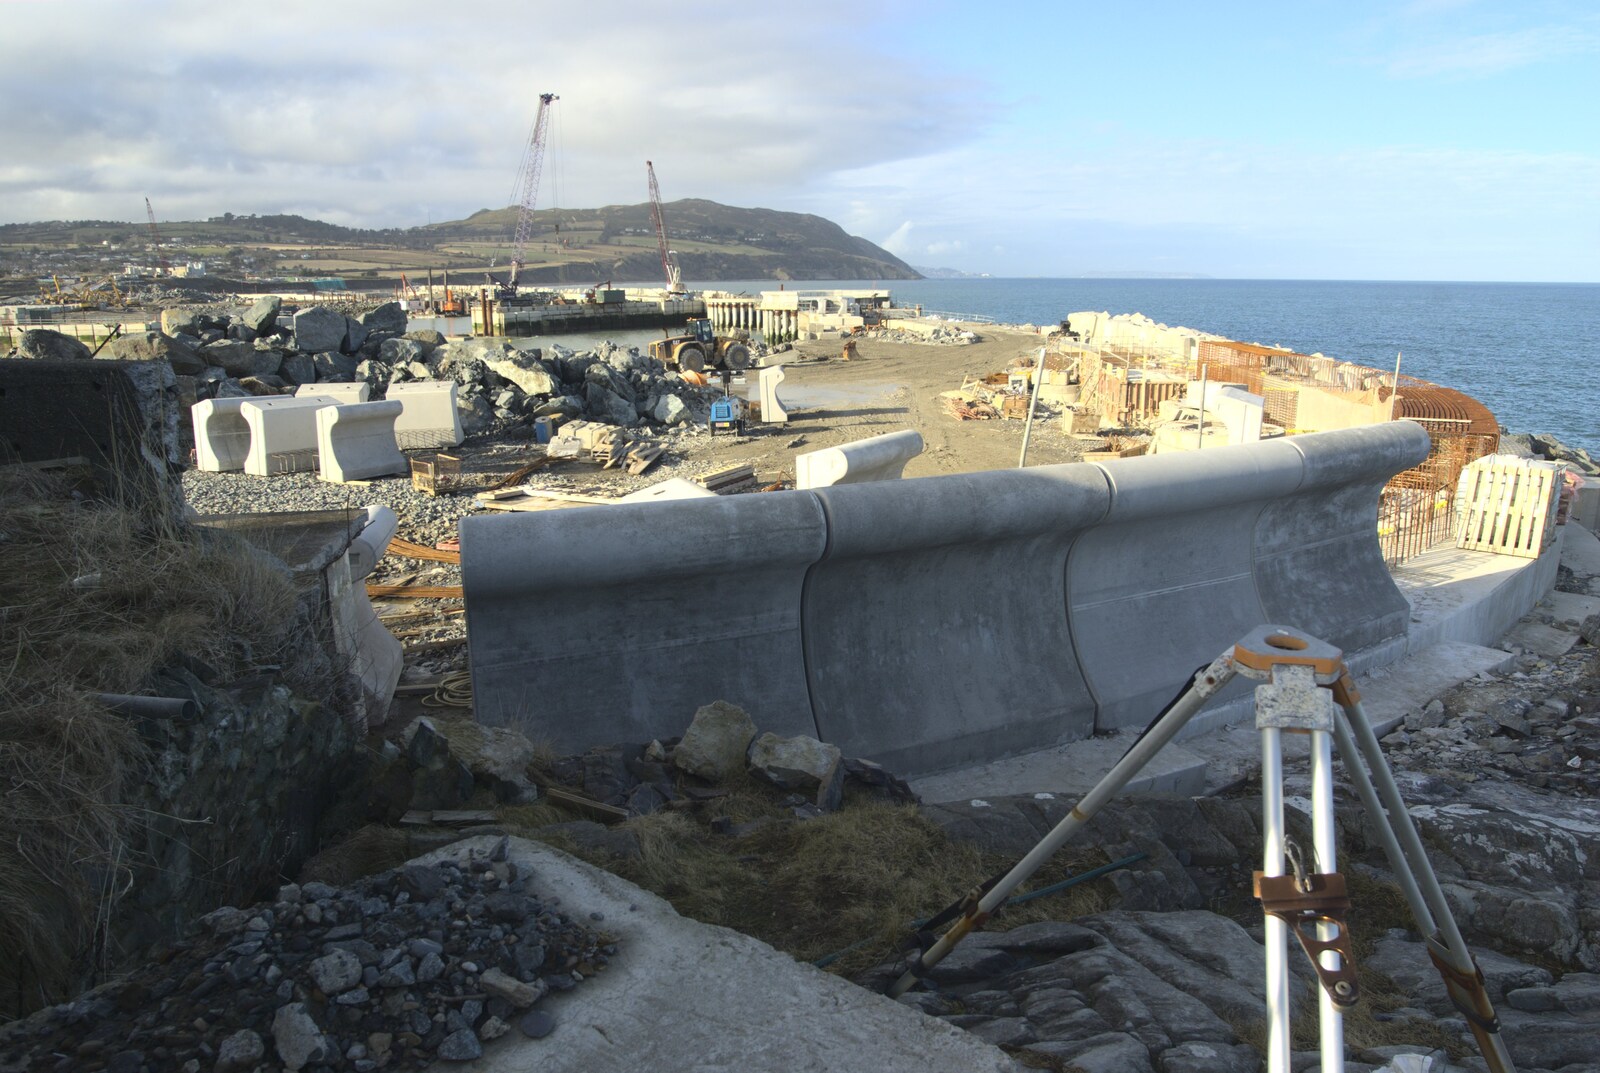 A new harbour and seawall is constructed from A Day in Greystones, County Dublin, Ireland - 28th February 2010